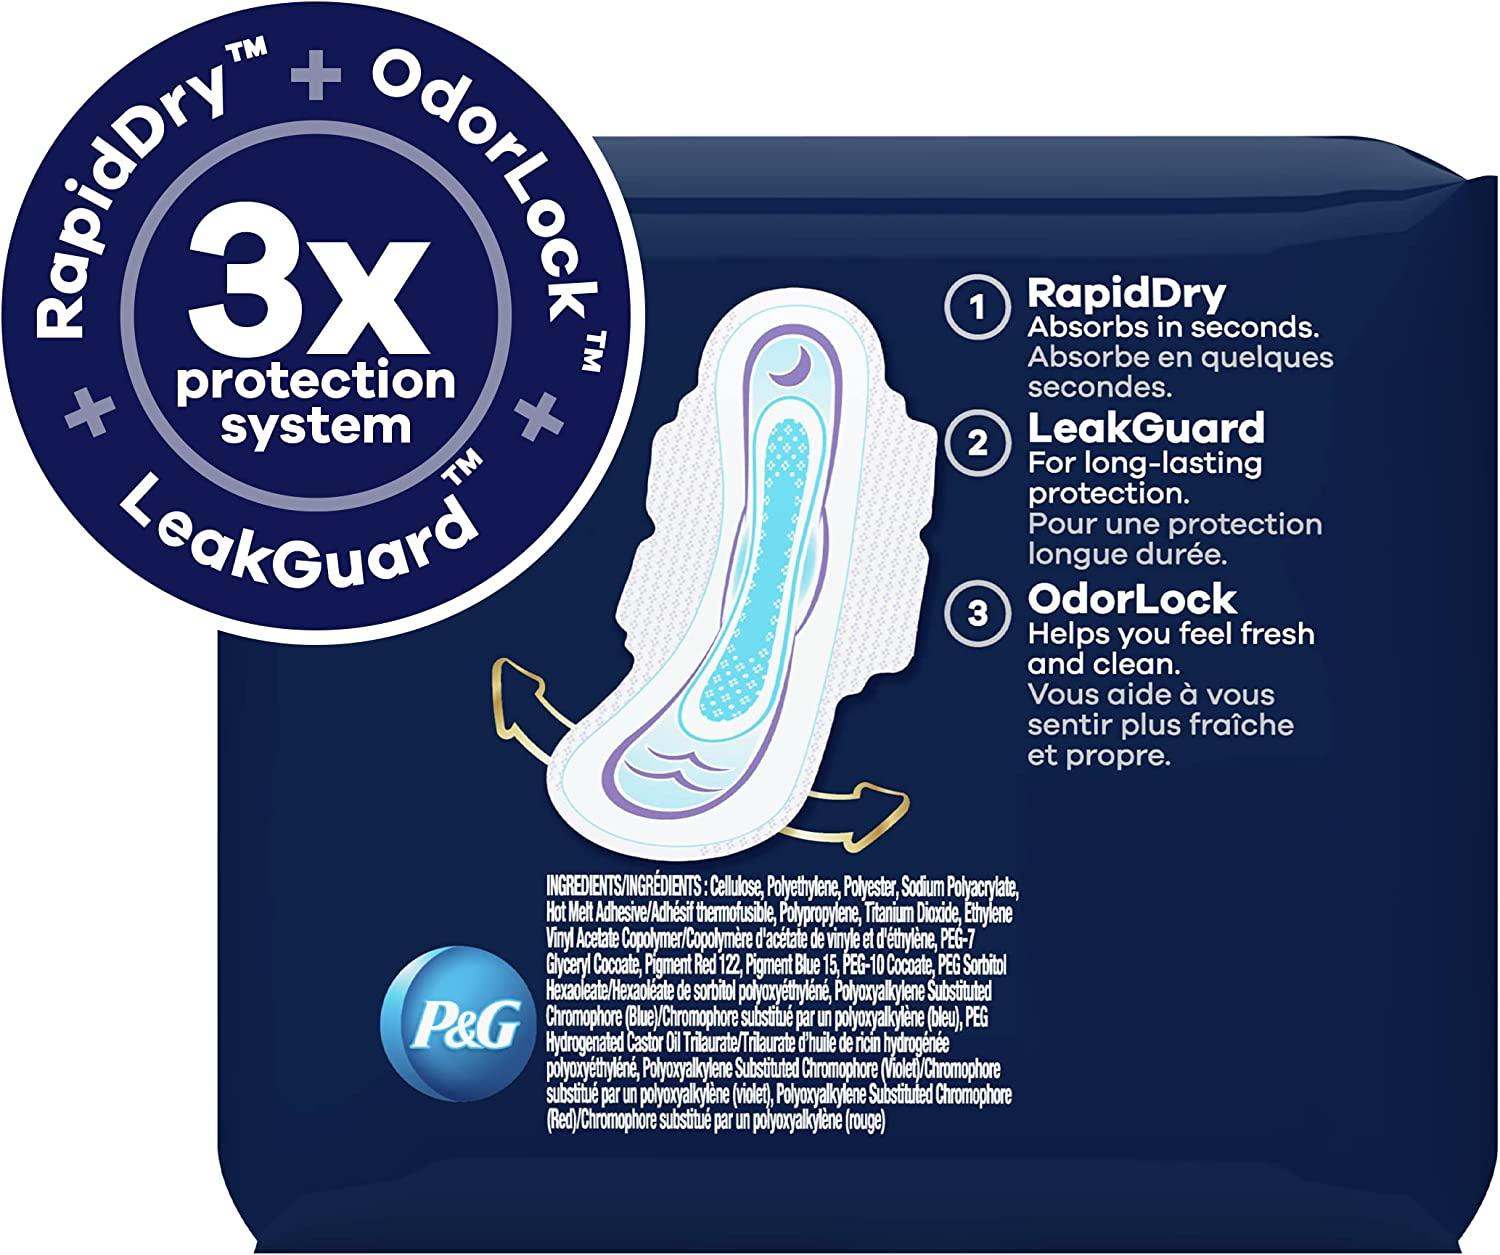 Always Ultra Thin Overnight Pads with Wings, Size 5, Extra Heavy Overnight  Absorbency, 34 Count 